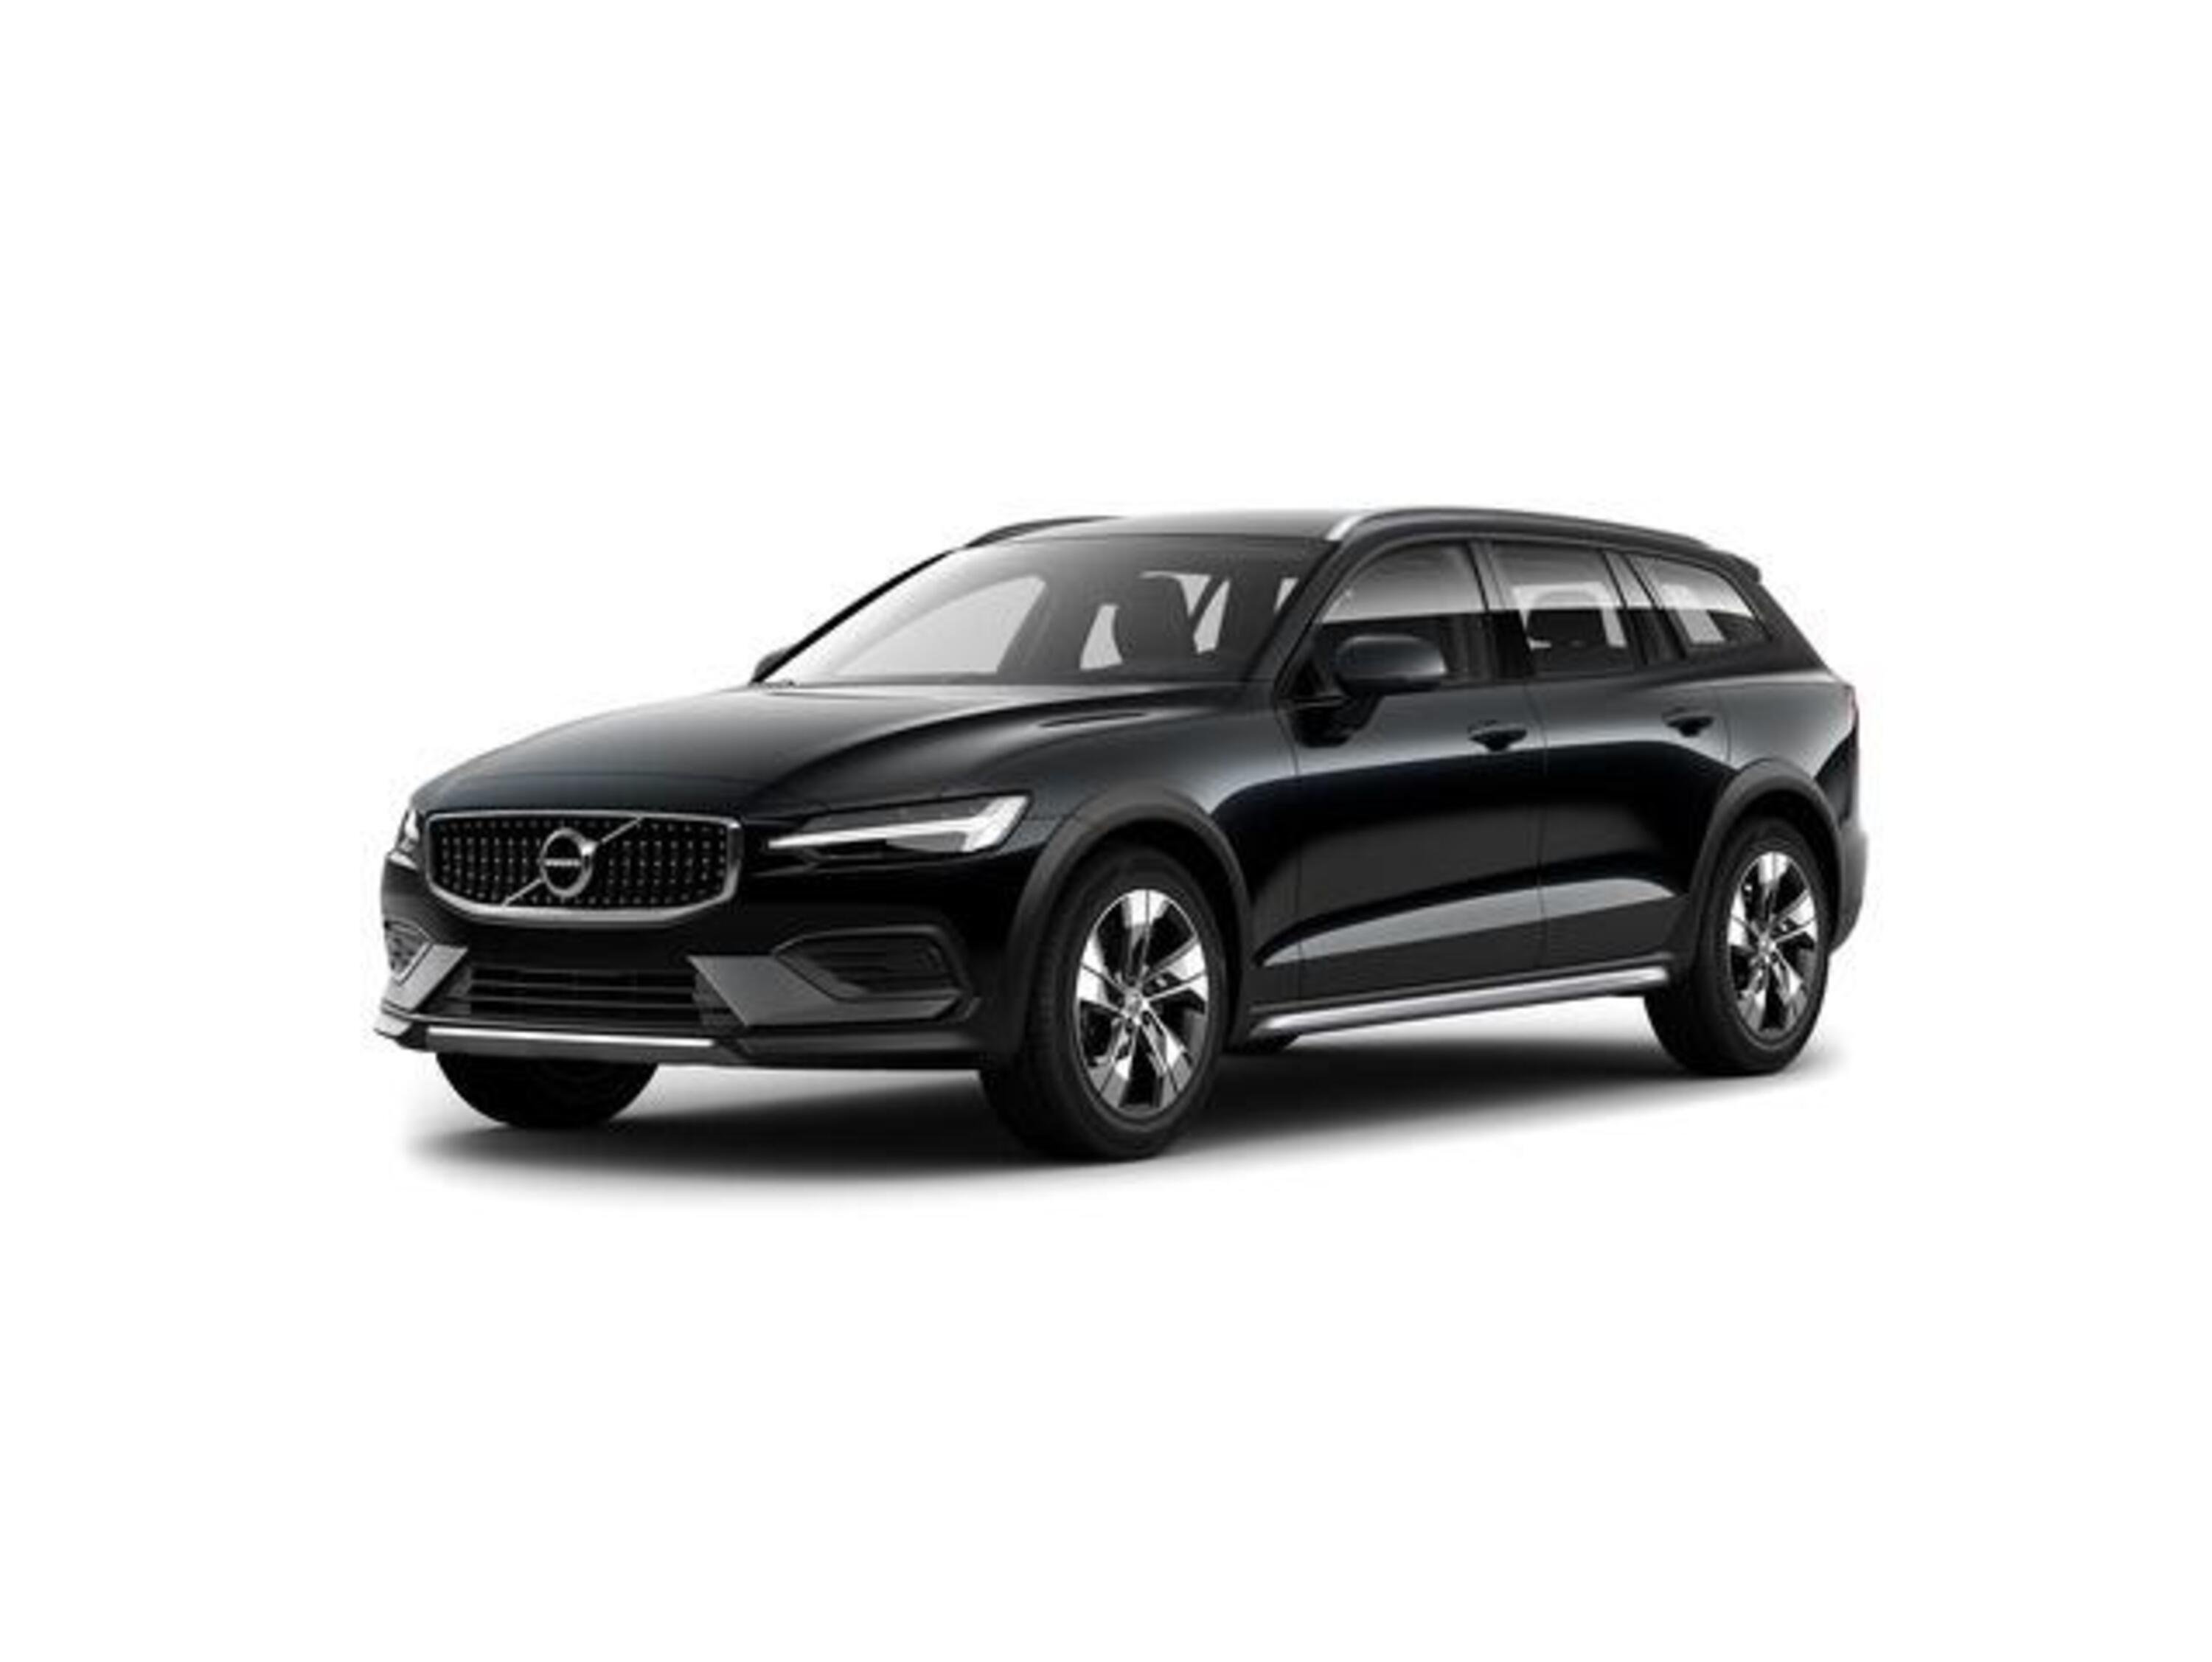 Volvo V60 Cross Country B4 (d) AWD Geartronic Business Pro Line